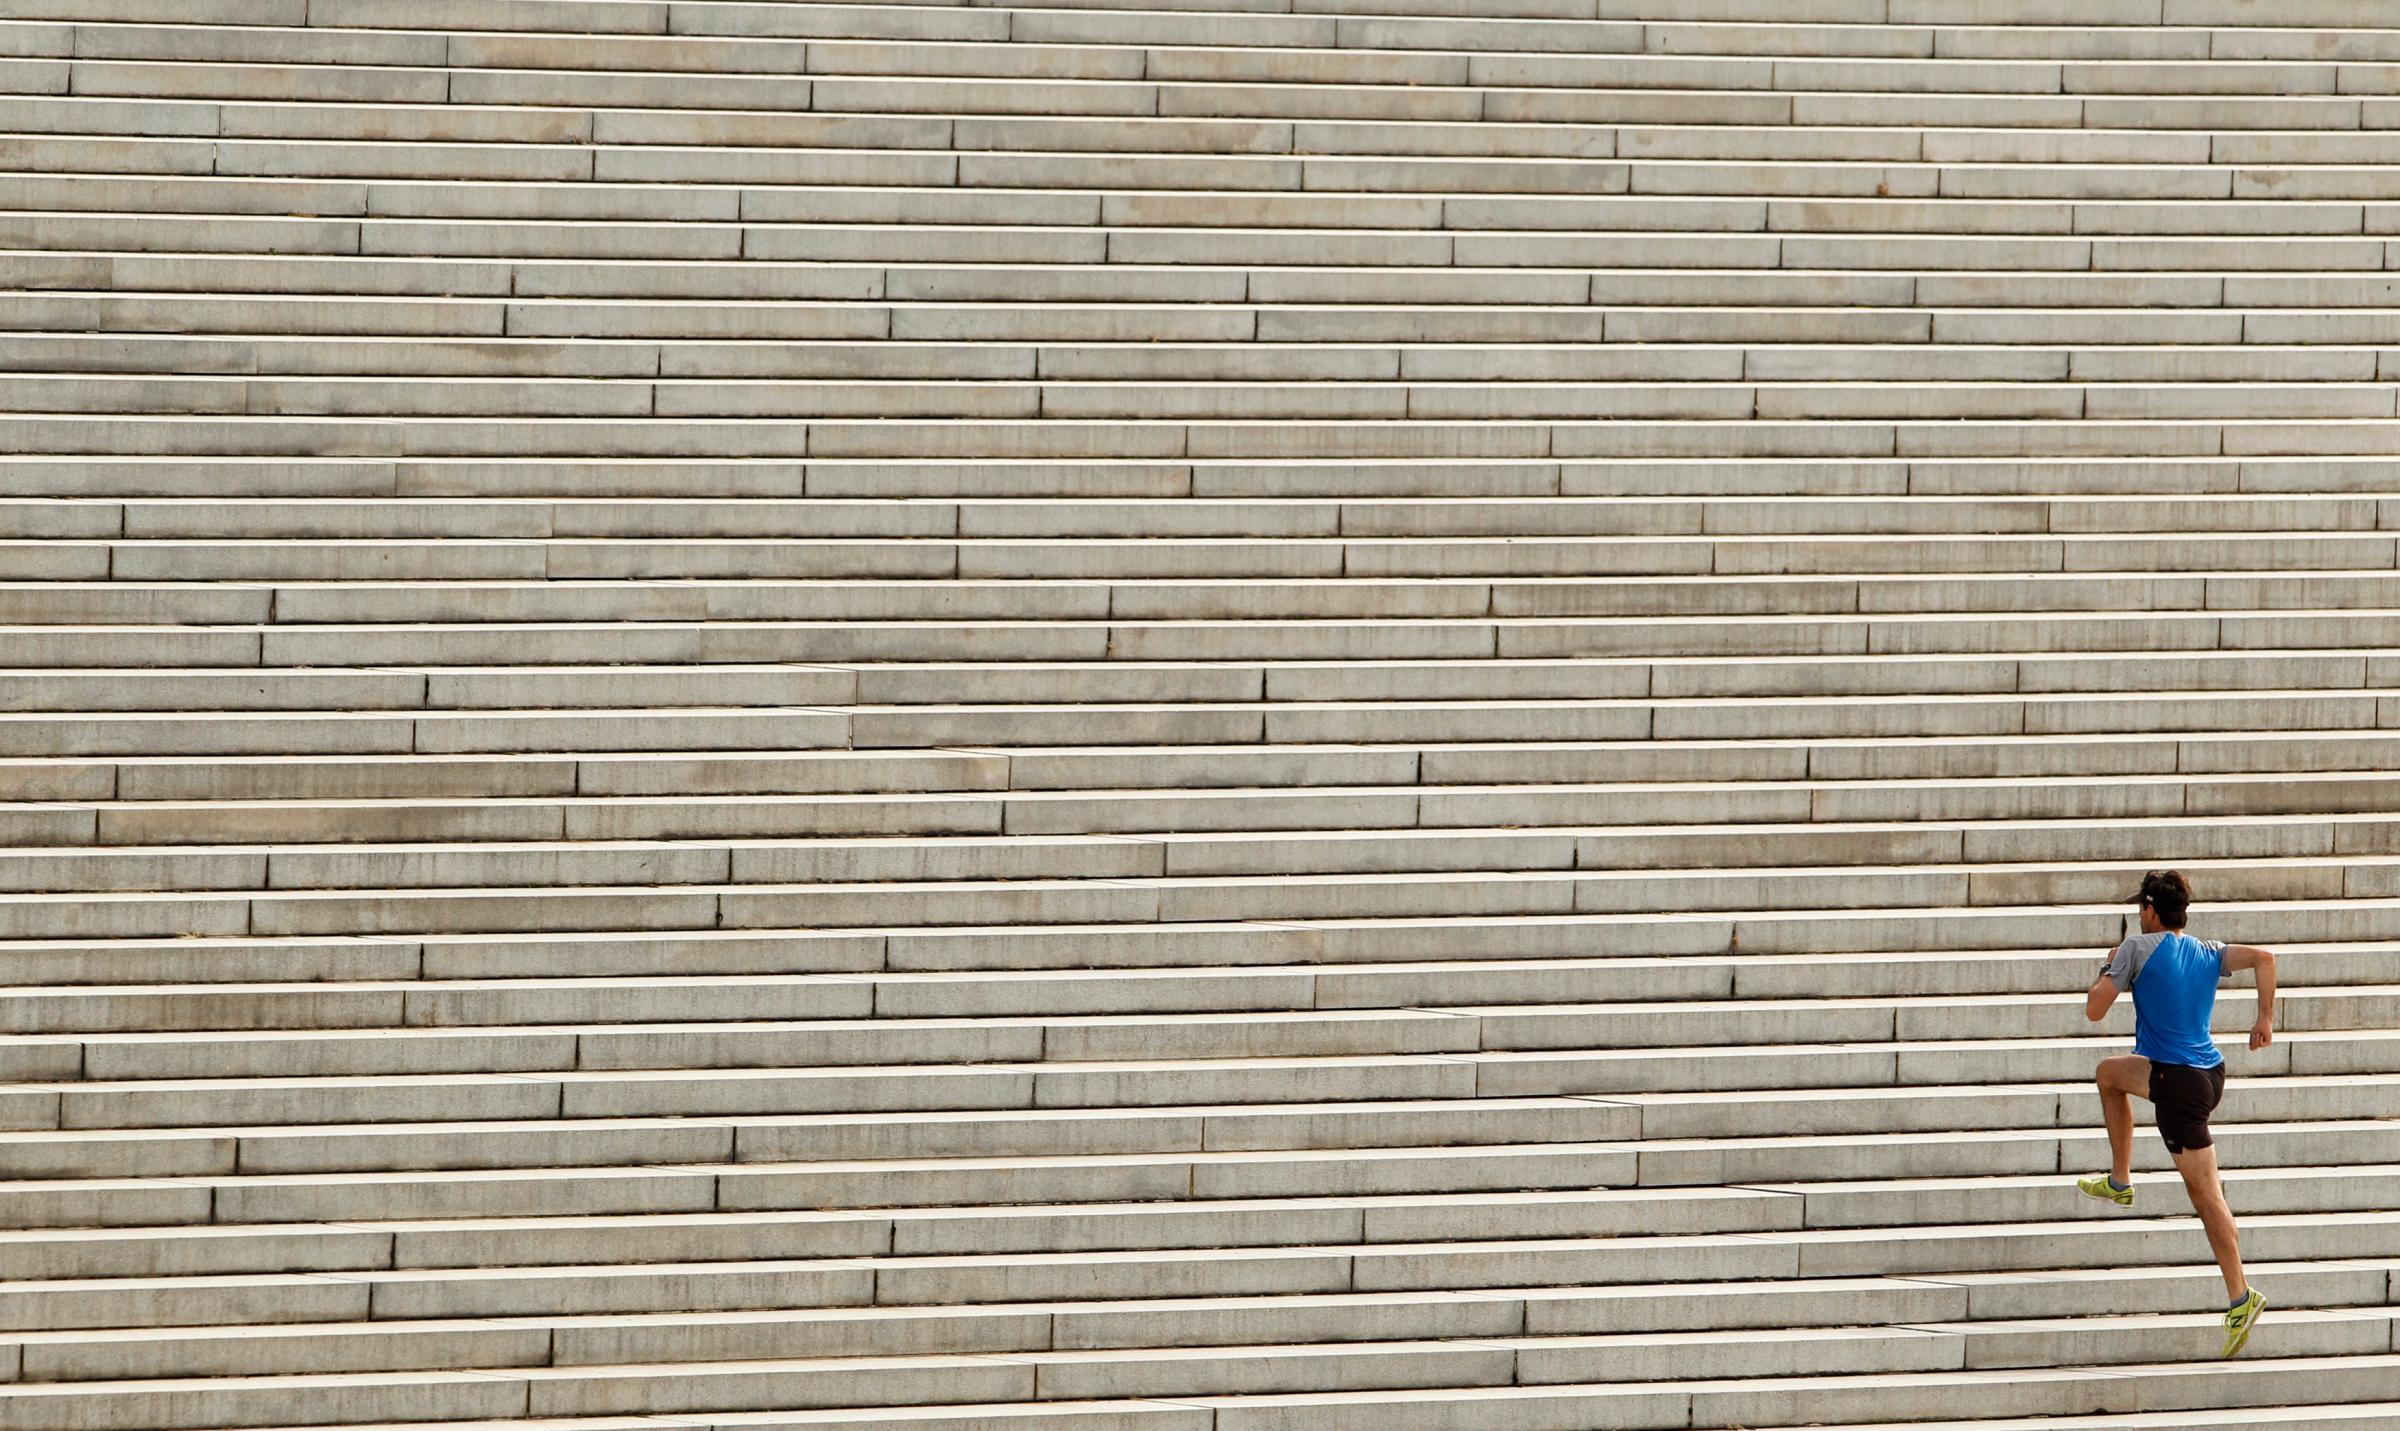 Runner ascends steps at the Lincoln Memorial in Washington